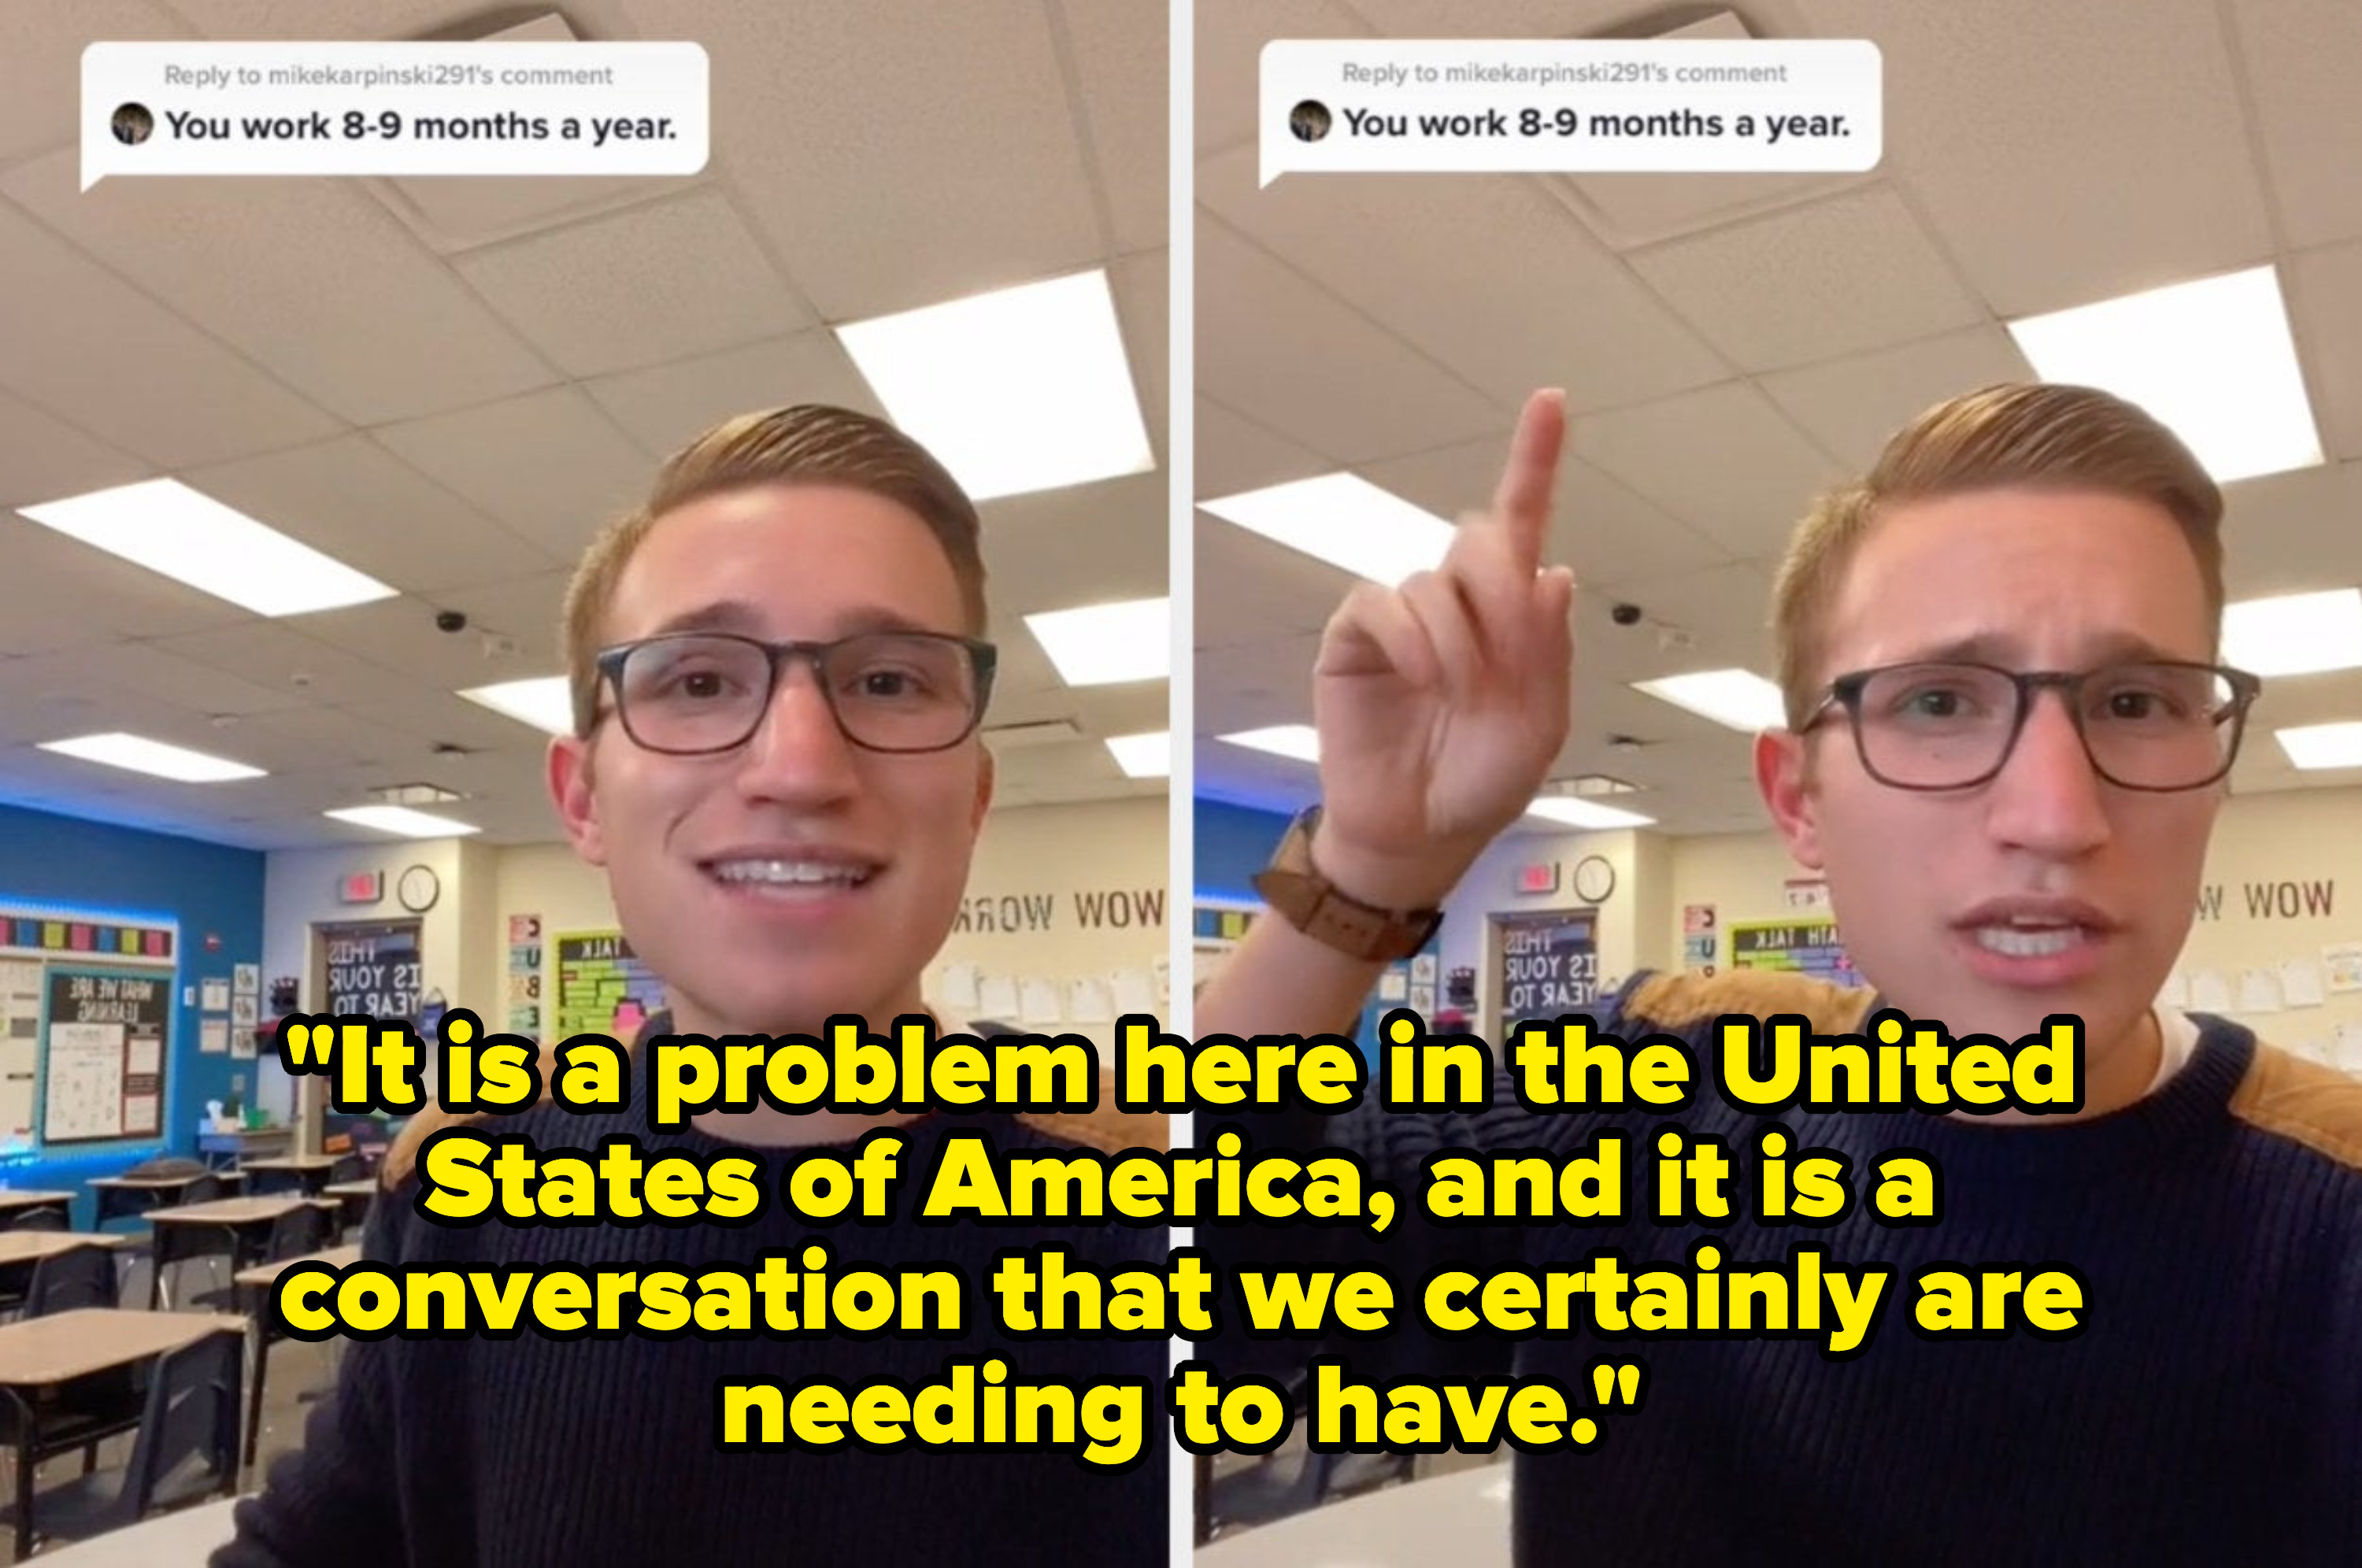 Kyle concludes his TikTok video saying, &quot;It is a problem here in the United States of America, and it is a conversation that we certainly are needing to have&quot;